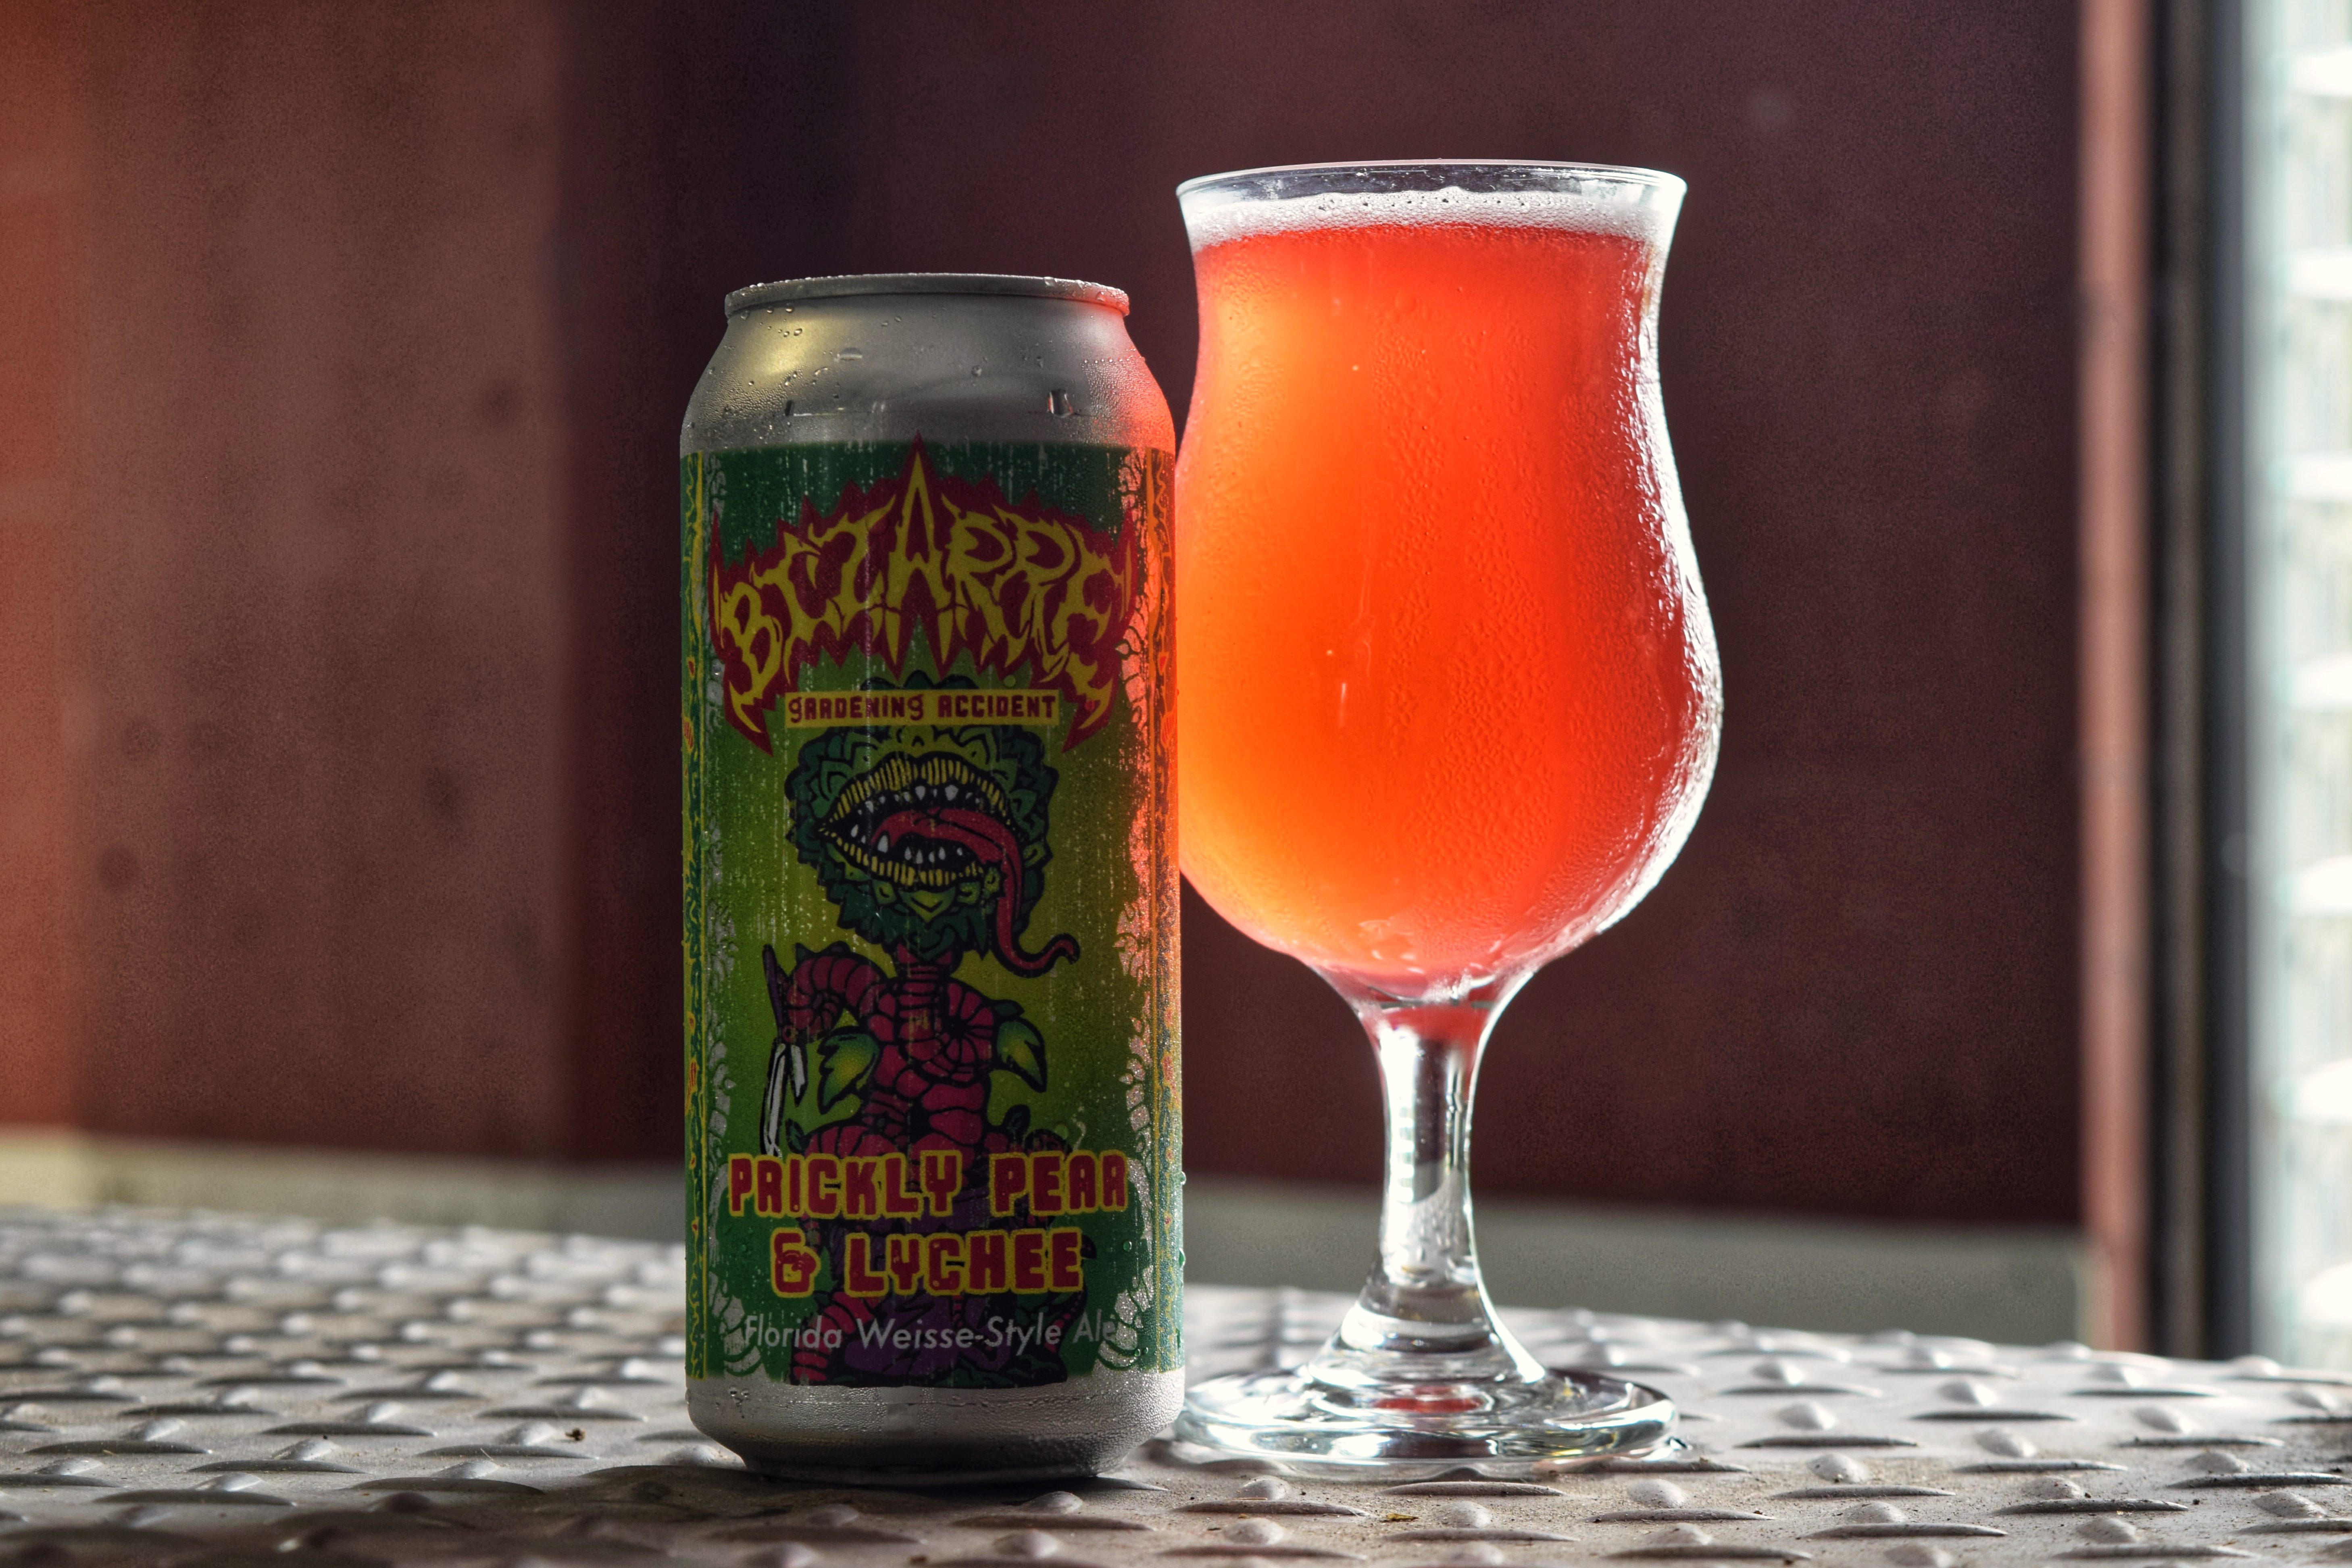 A can and tall class of Motoroworks Brewing Bizzare Gardening Accident of Prickly Pear & Lychee